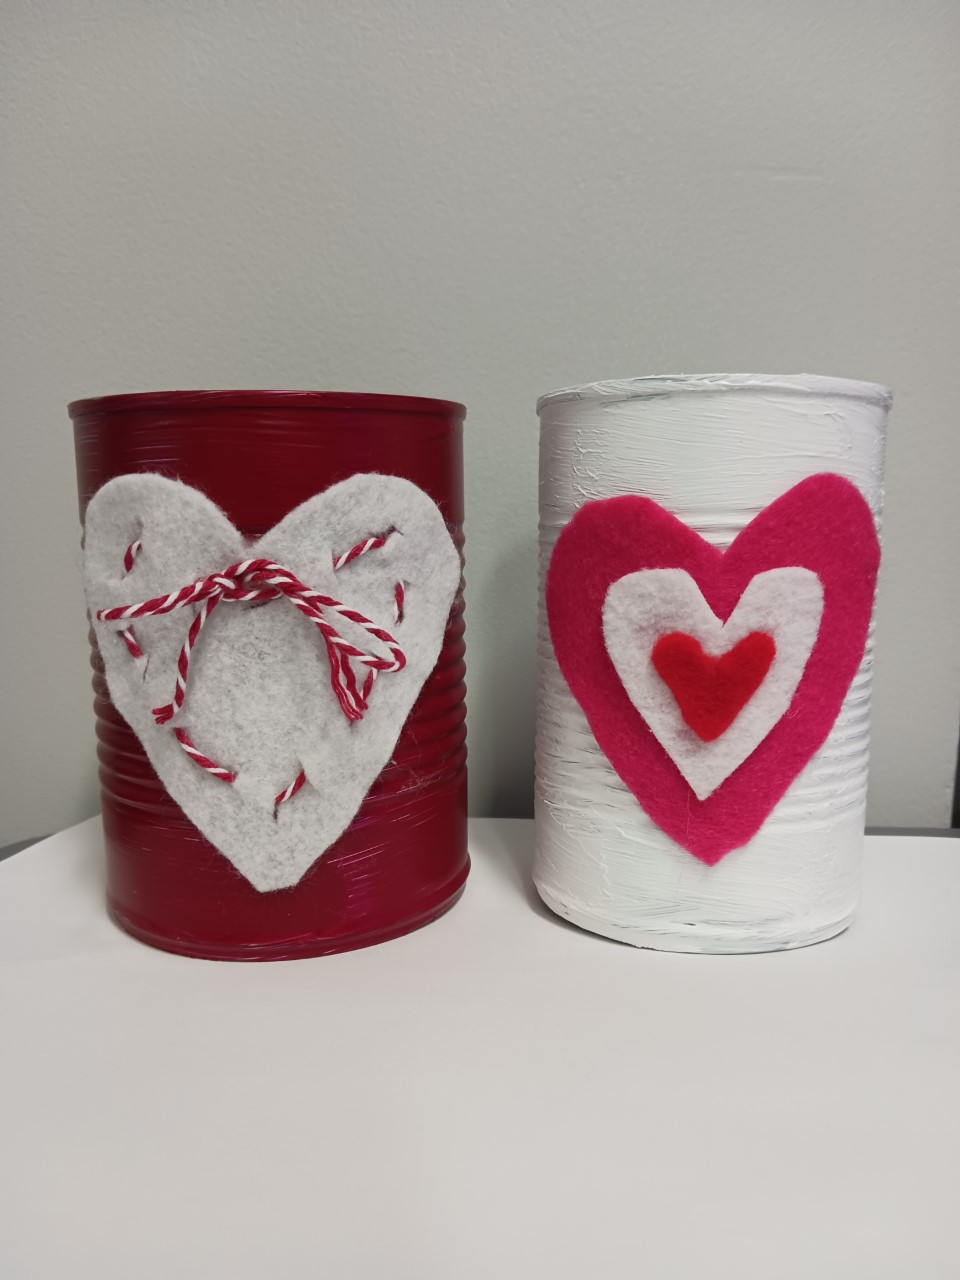 Join us in making a Valen-Tincan's day inspired Craft!